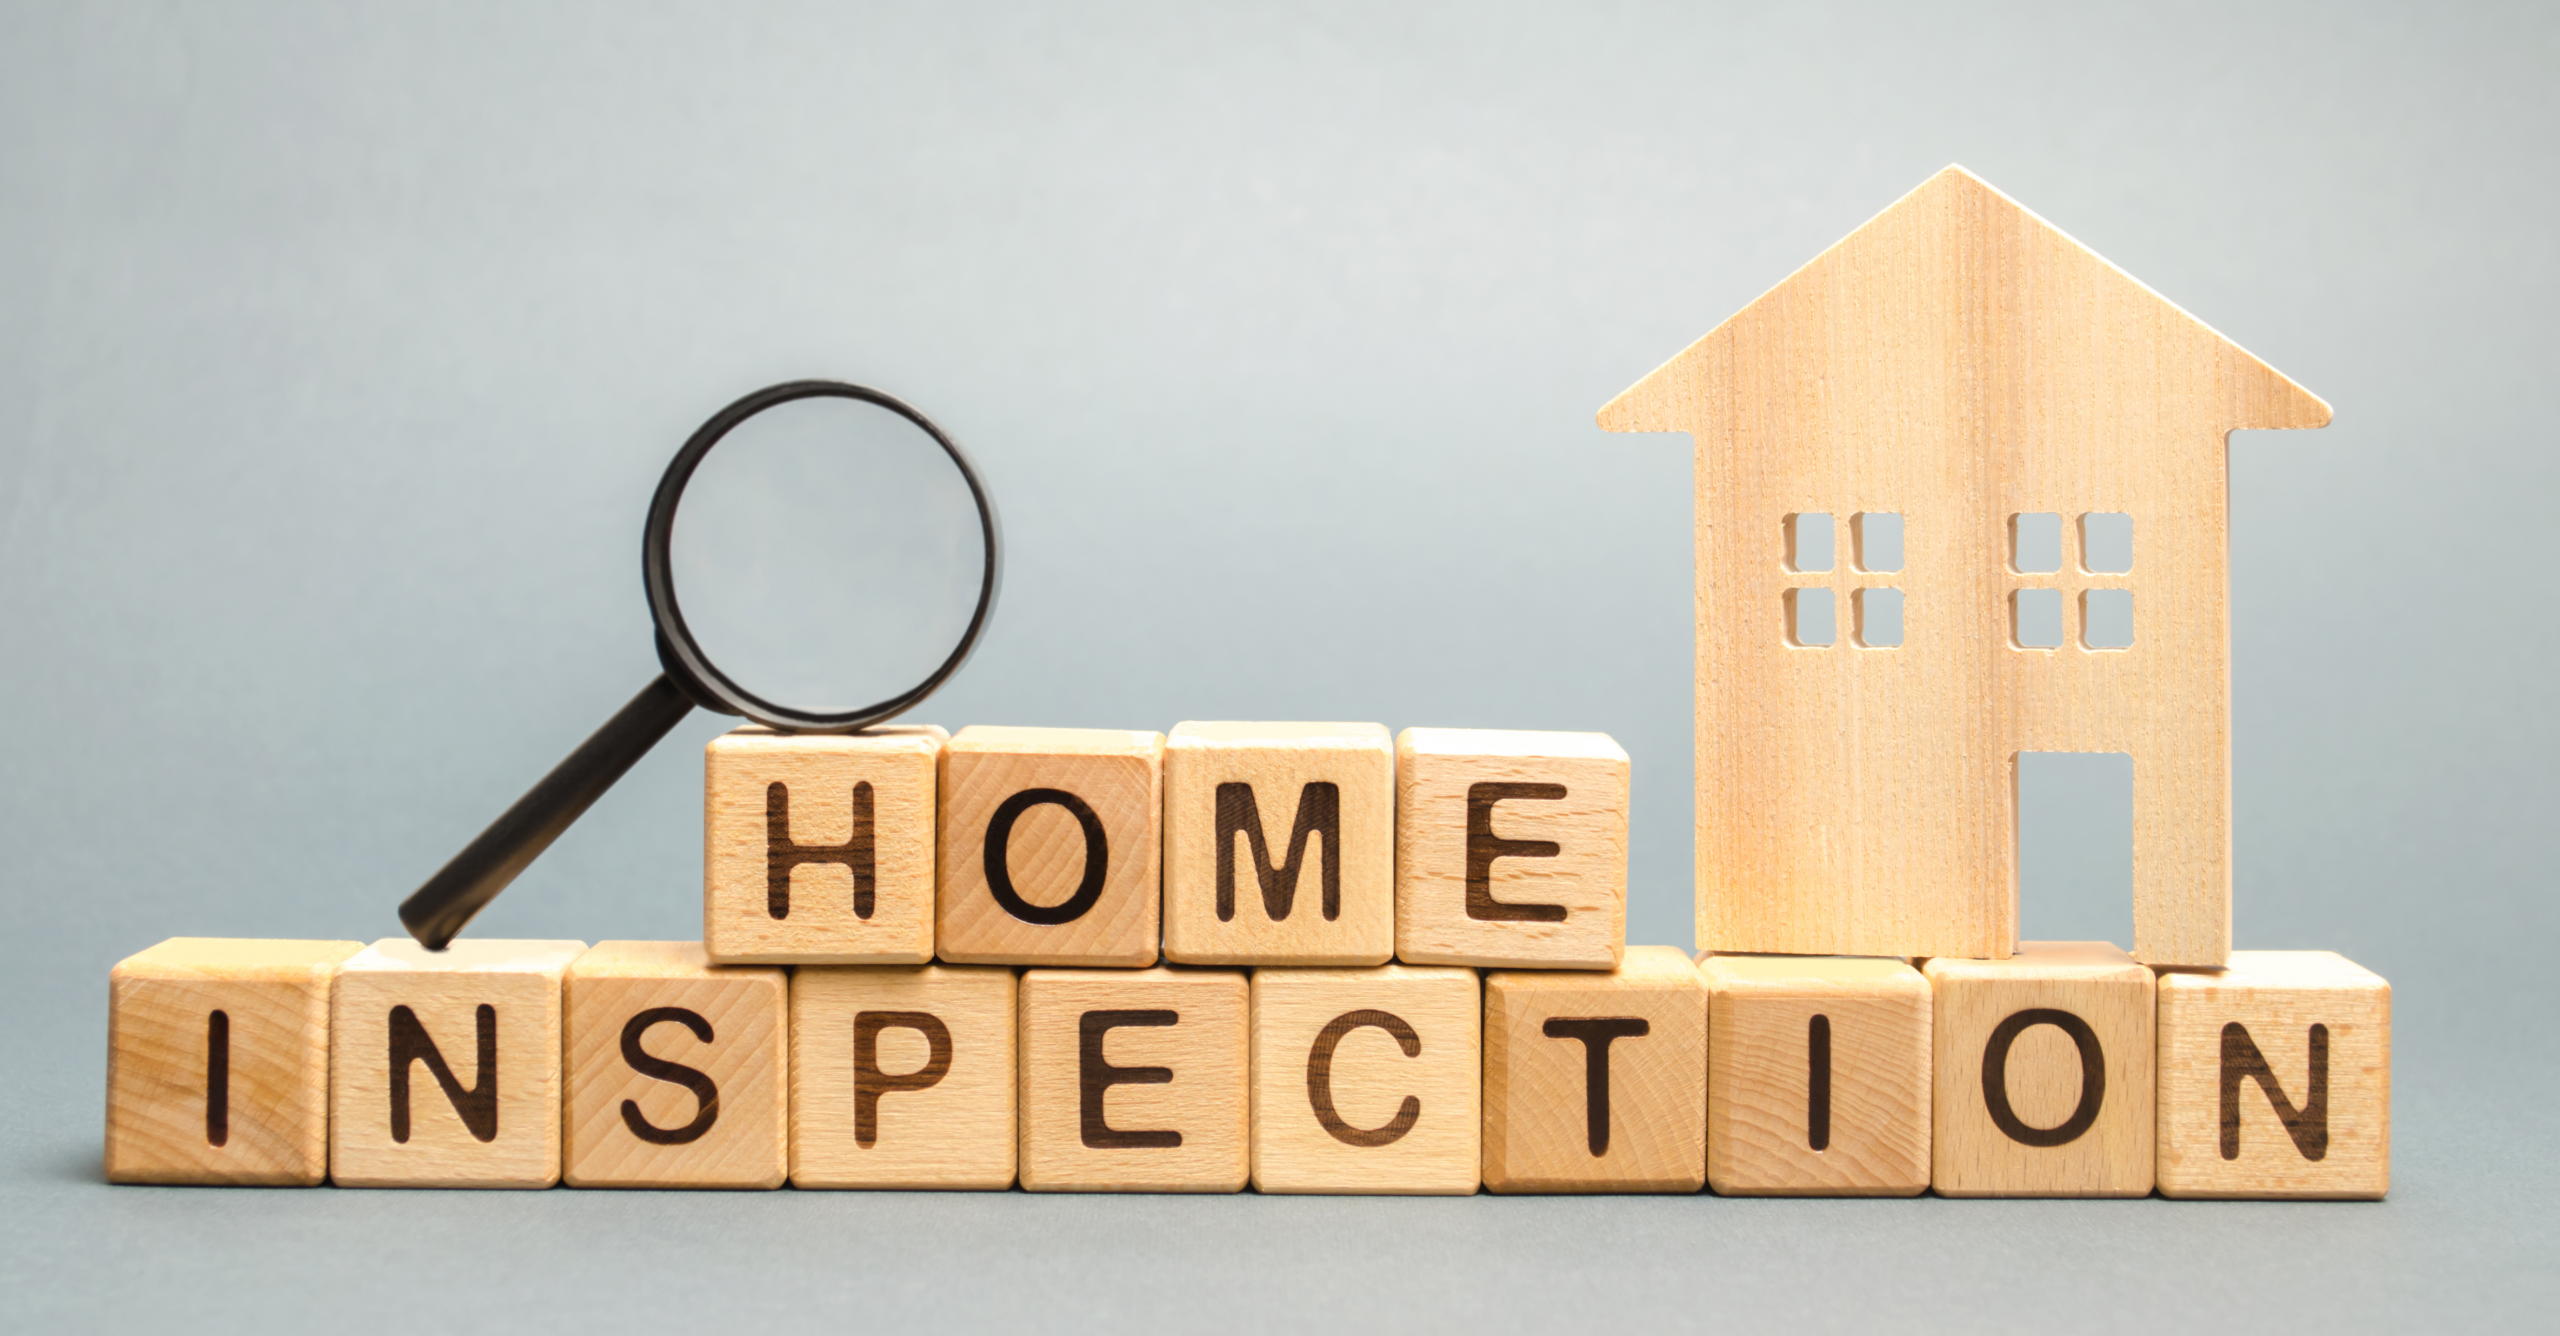 Home inspection like a wooden bricks